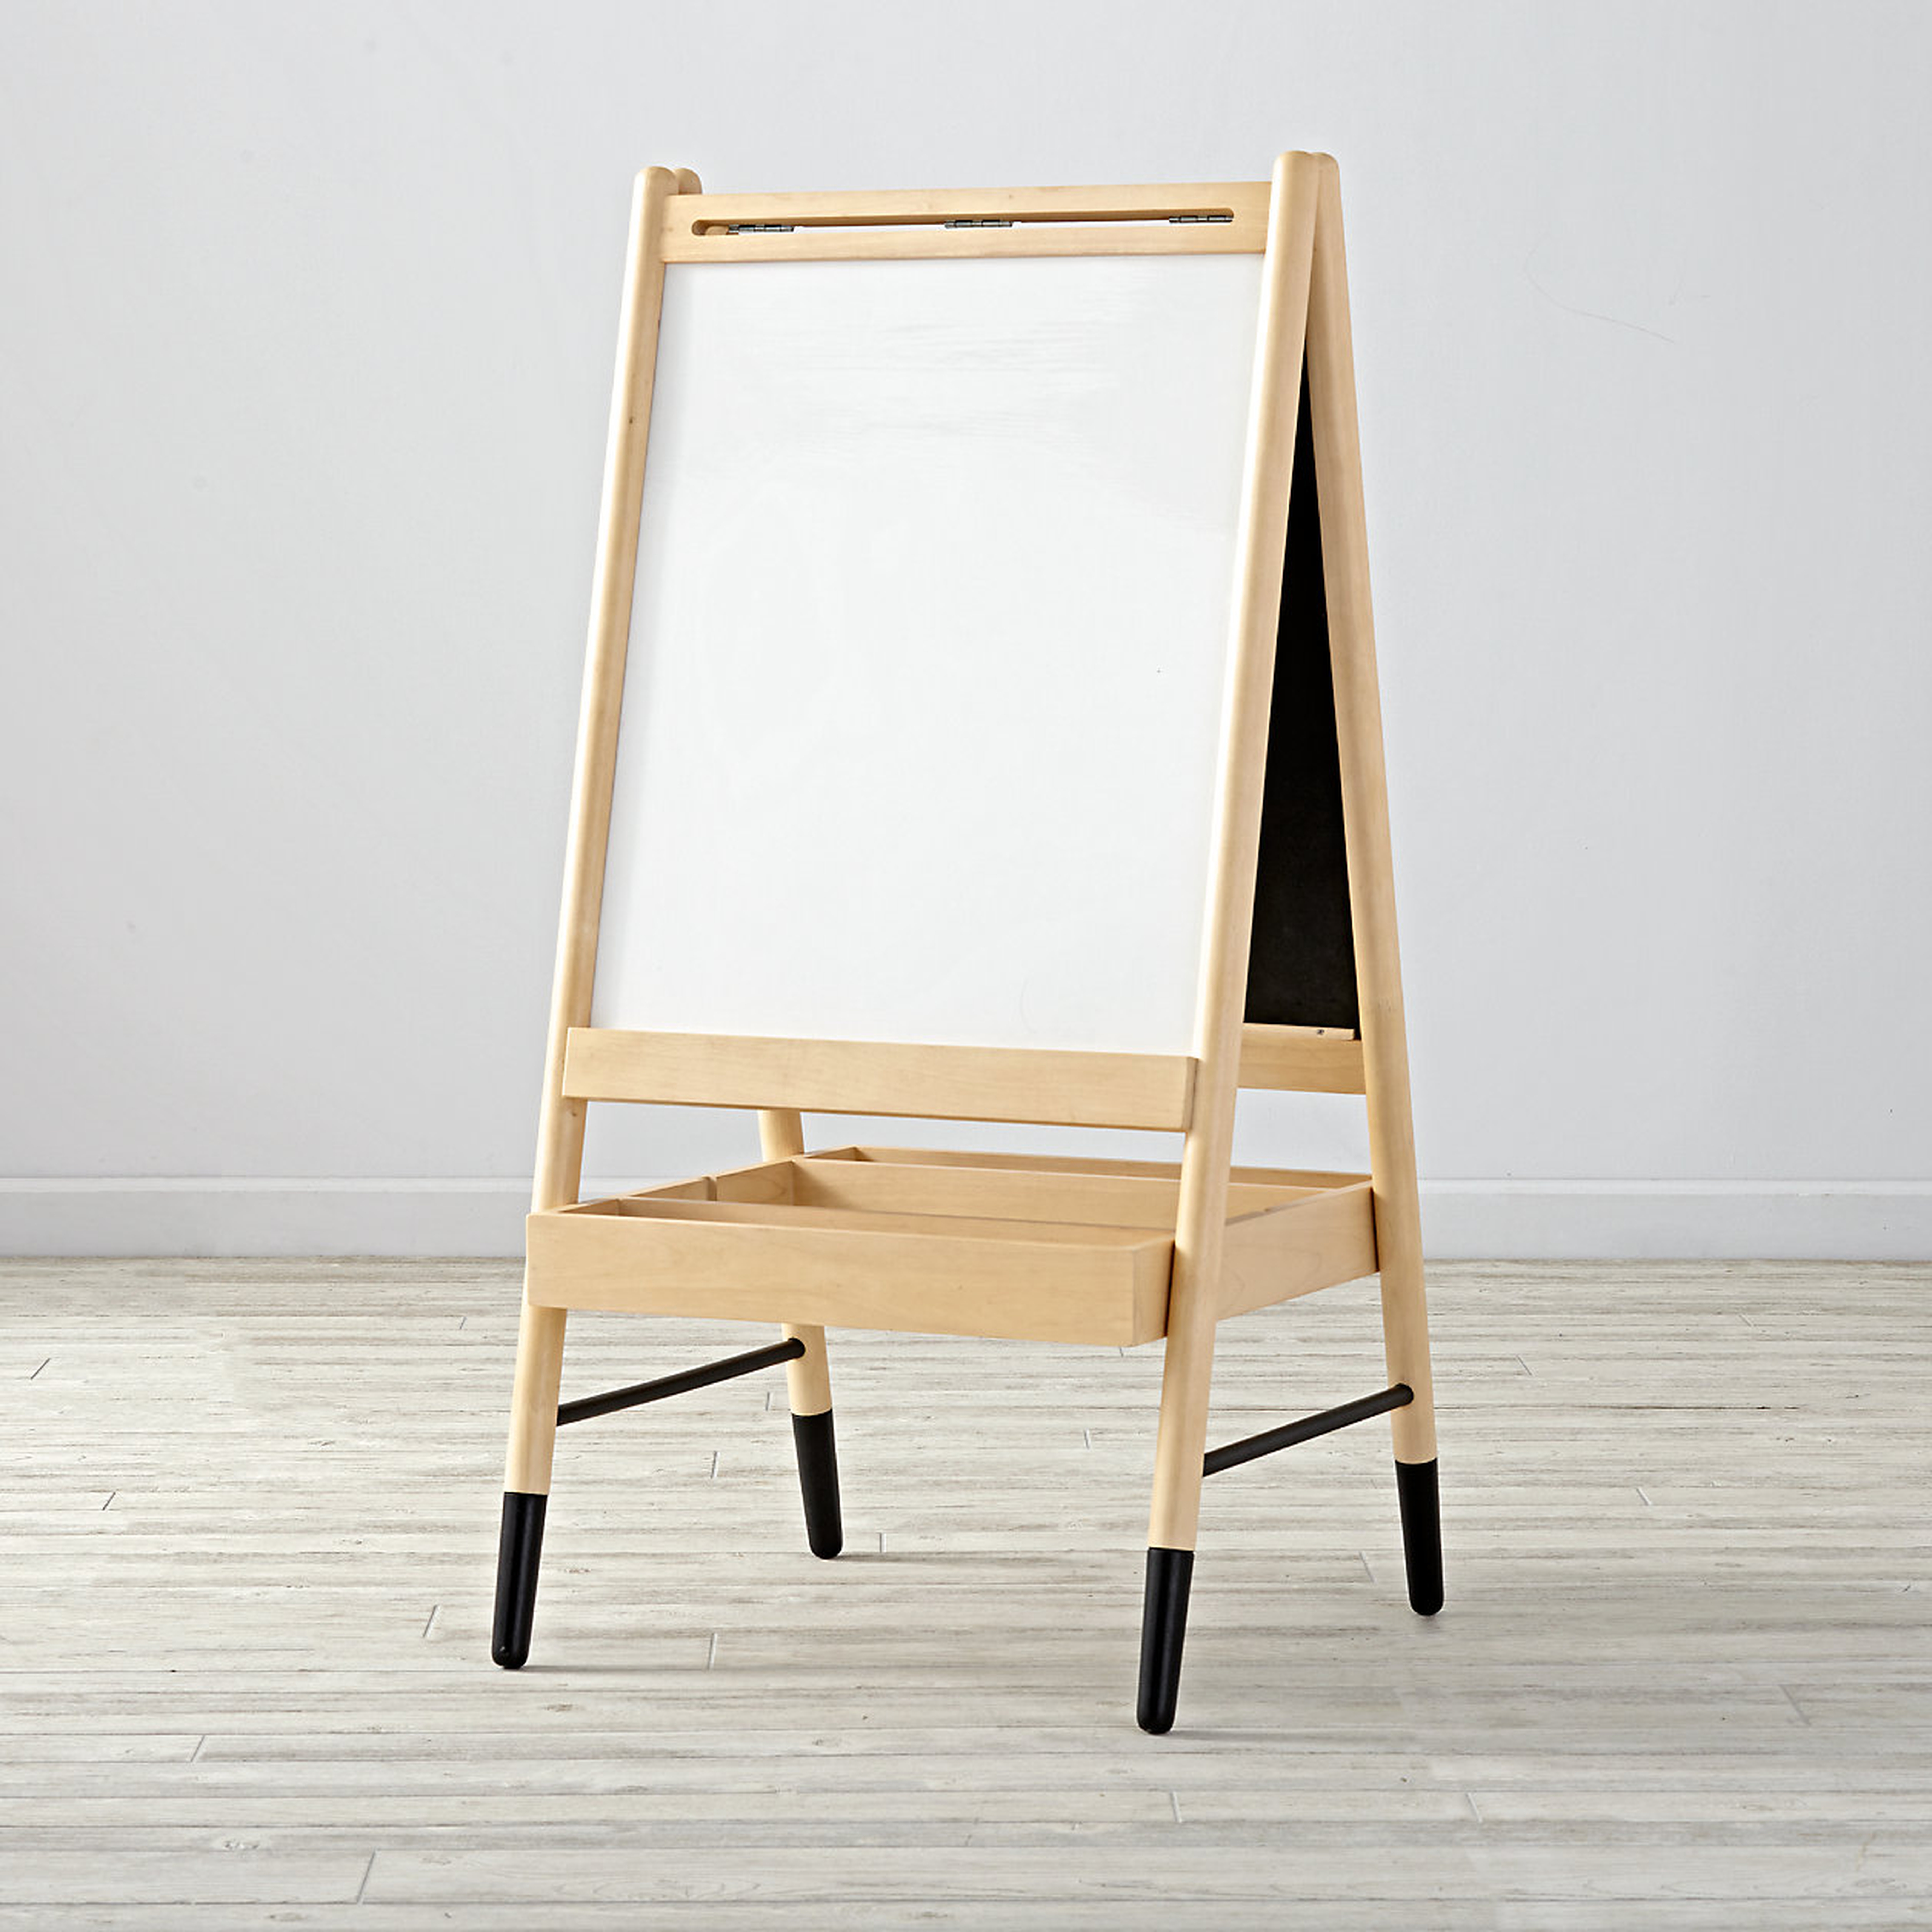 Wooden Kids Art Easel - Crate and Barrel